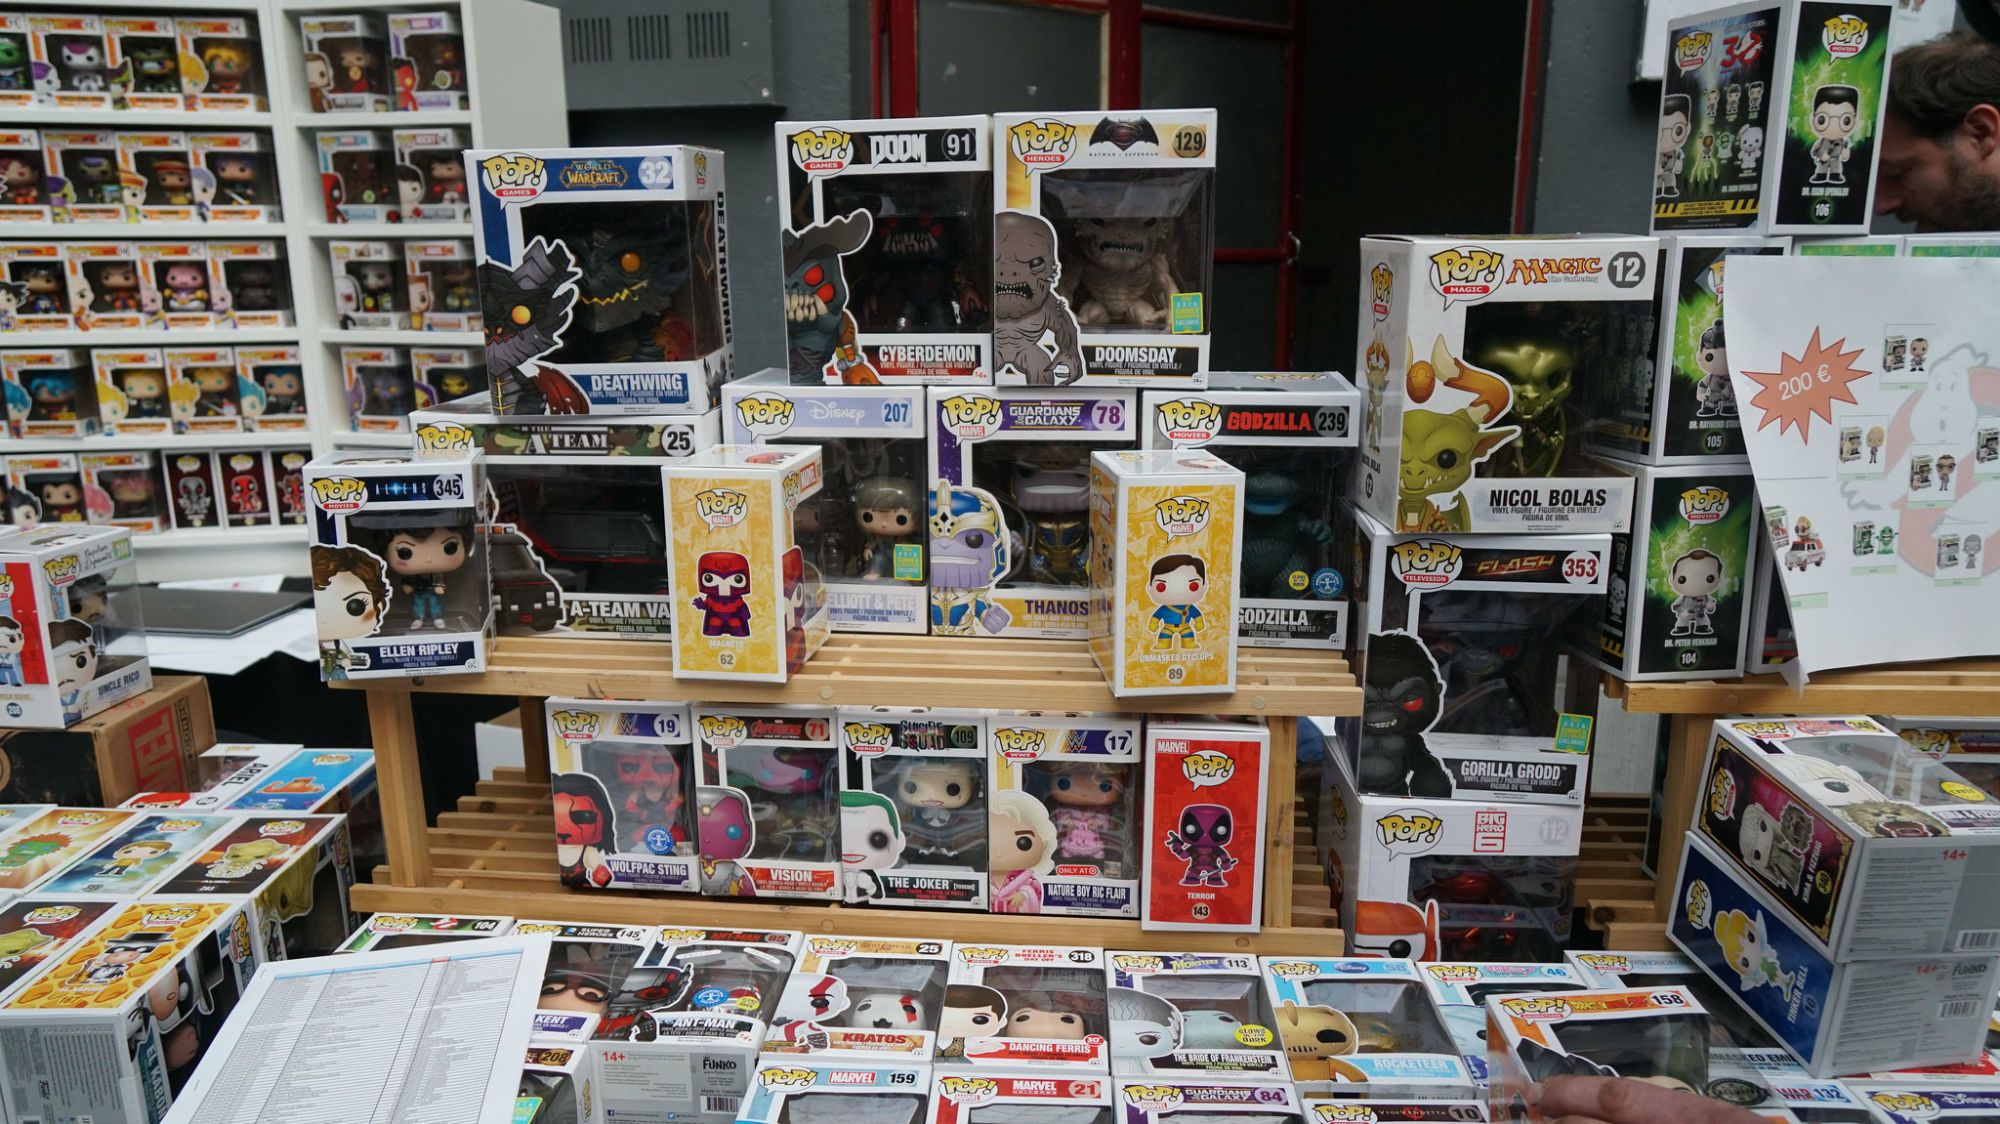 10 Funko Pops! Worth a Small Fortune | Mental Floss